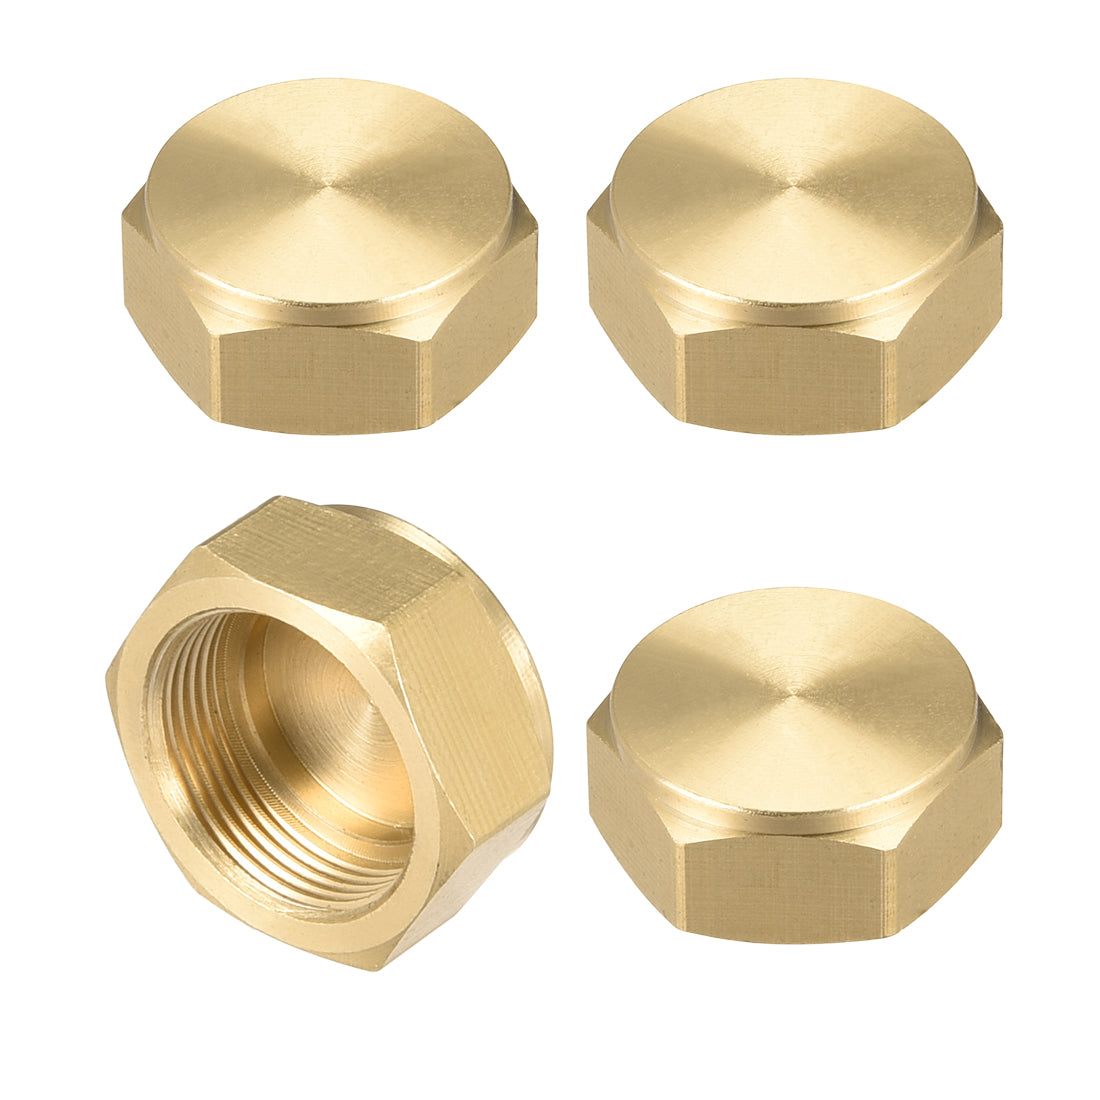 Uxcell Uxcell Brass Female Pipe Fitting Valve Cap M20x1.0 Hex Head End Plug Connector 4pcs